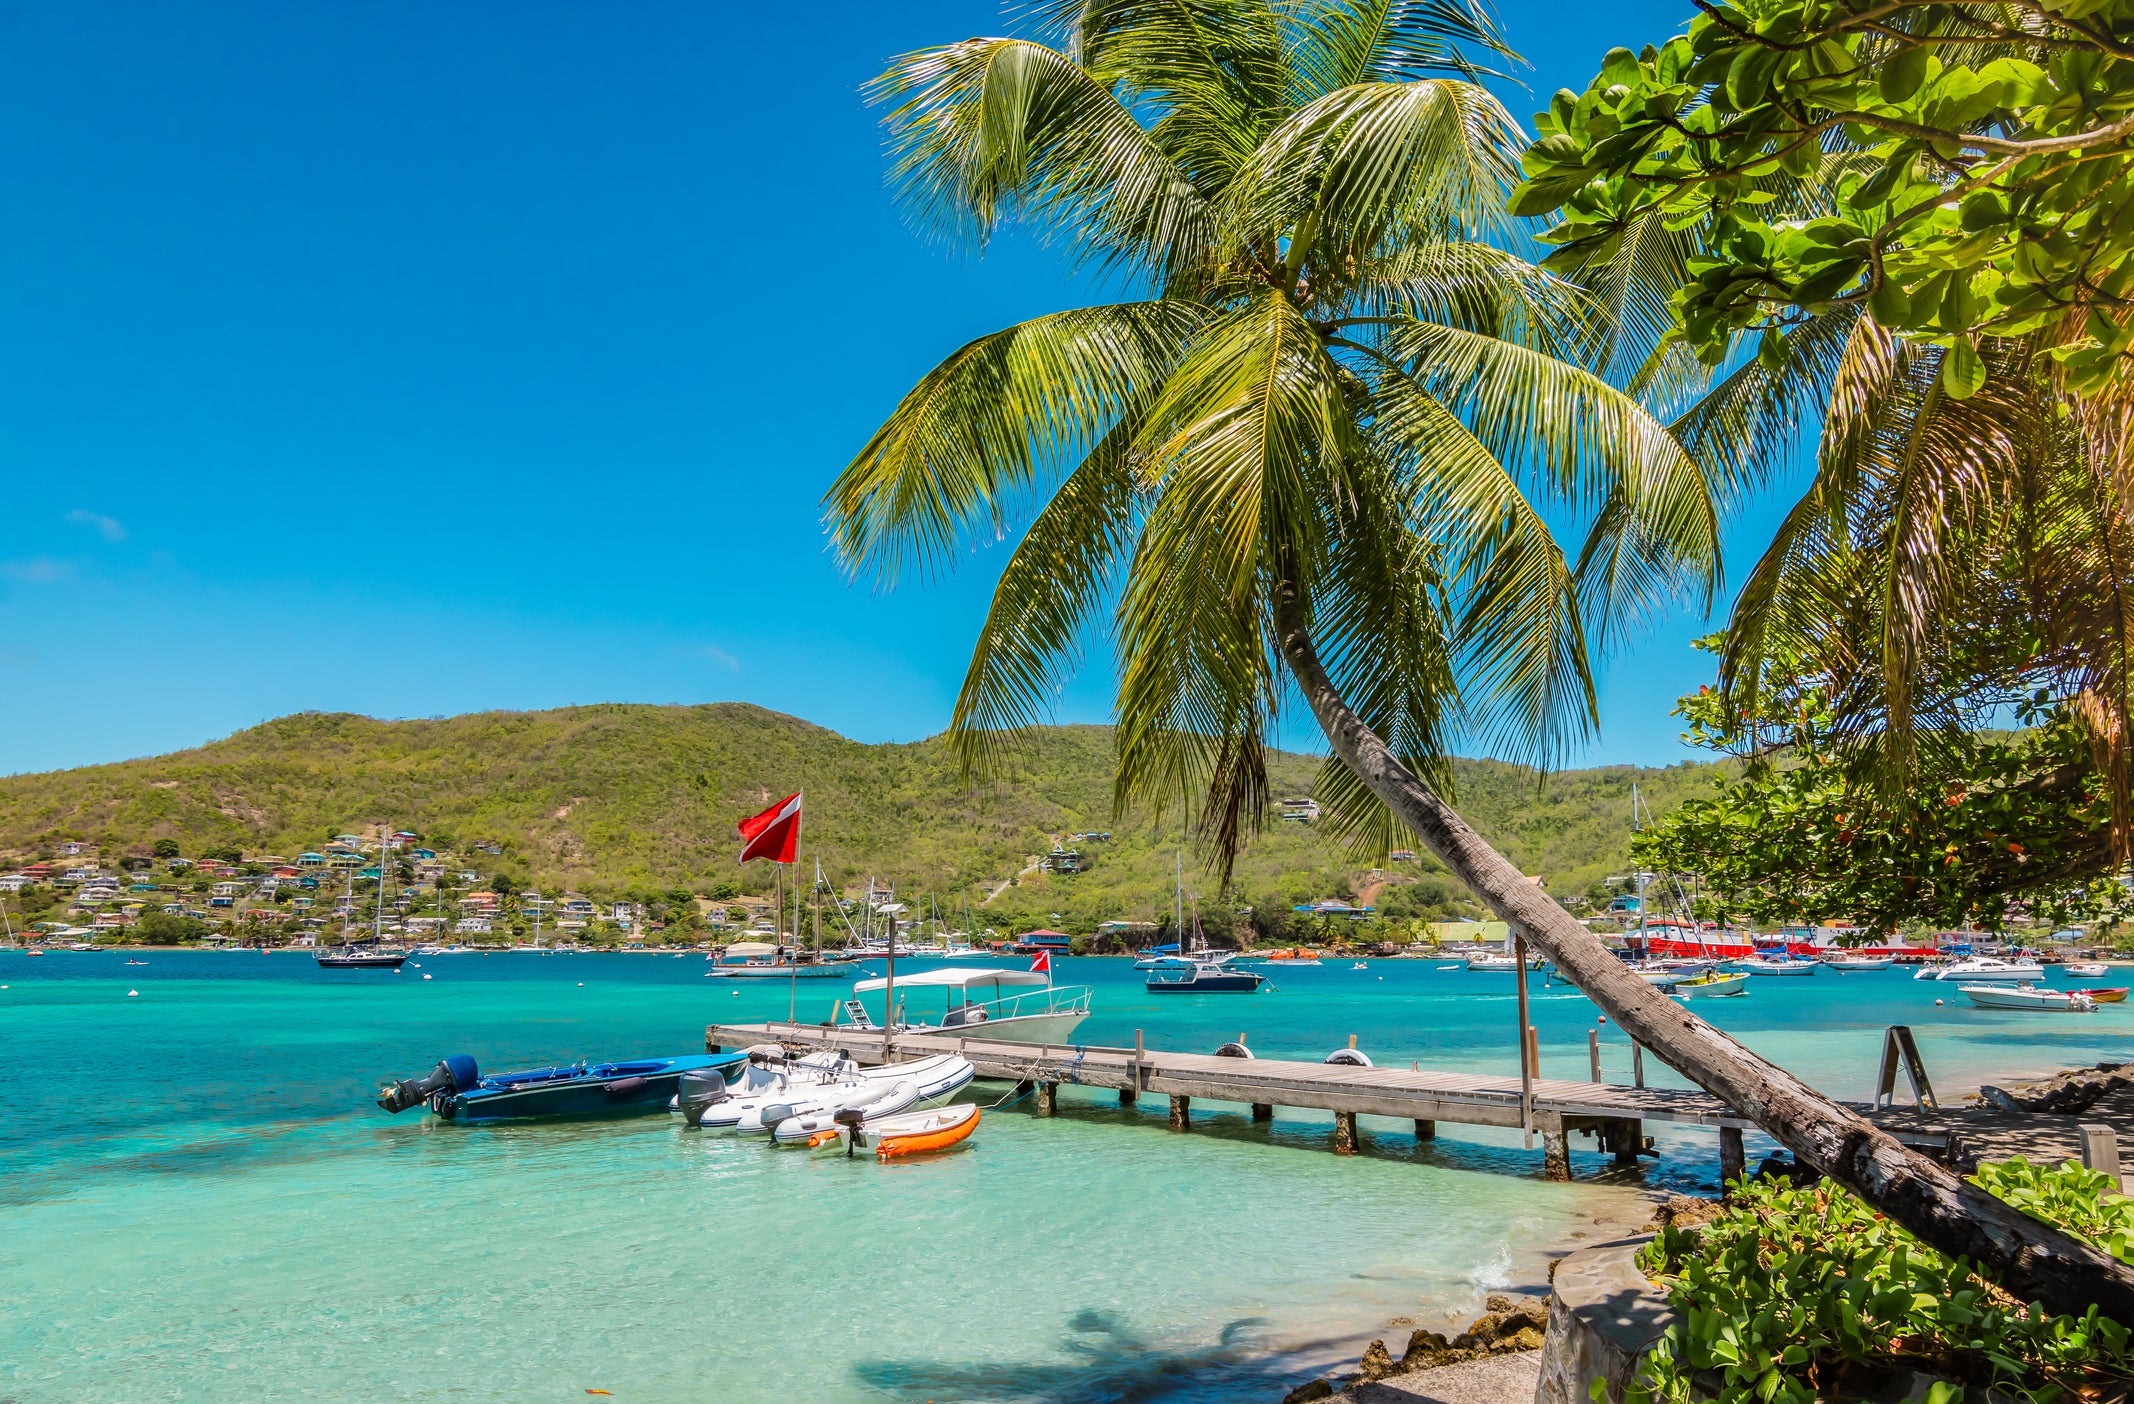 The harbour of Port Elisabeth in Bequia, part of Saint Vincent and the Grenadines.